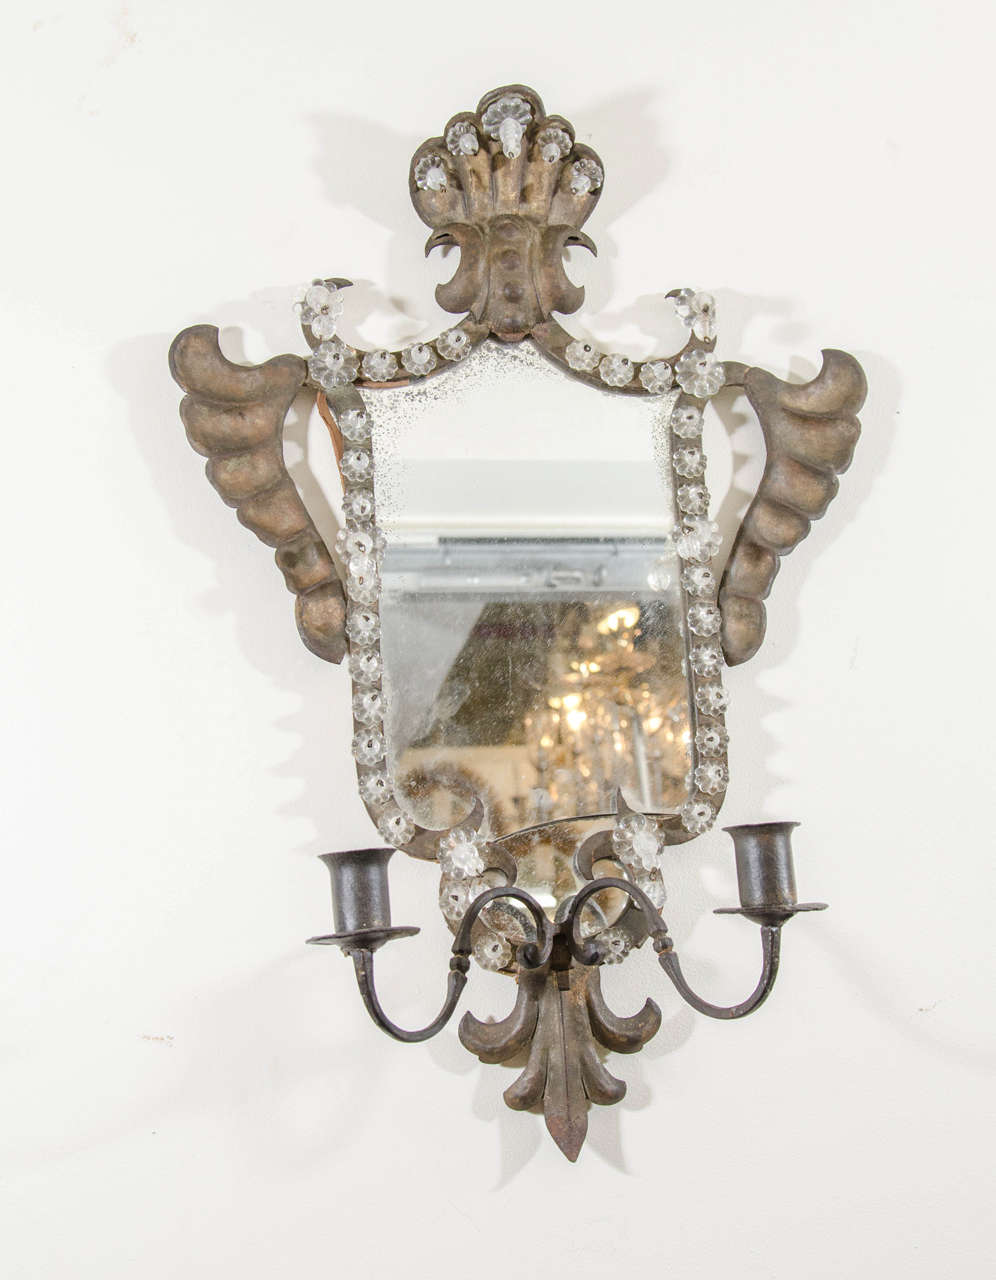 An 18th century pair of Venetian mirrored and gilt hand-wrought iron candle sconces with rosettes. Good vintage condition with age appropriate wear and patina. Some silvering and one mirror has a crack. Never electrified.